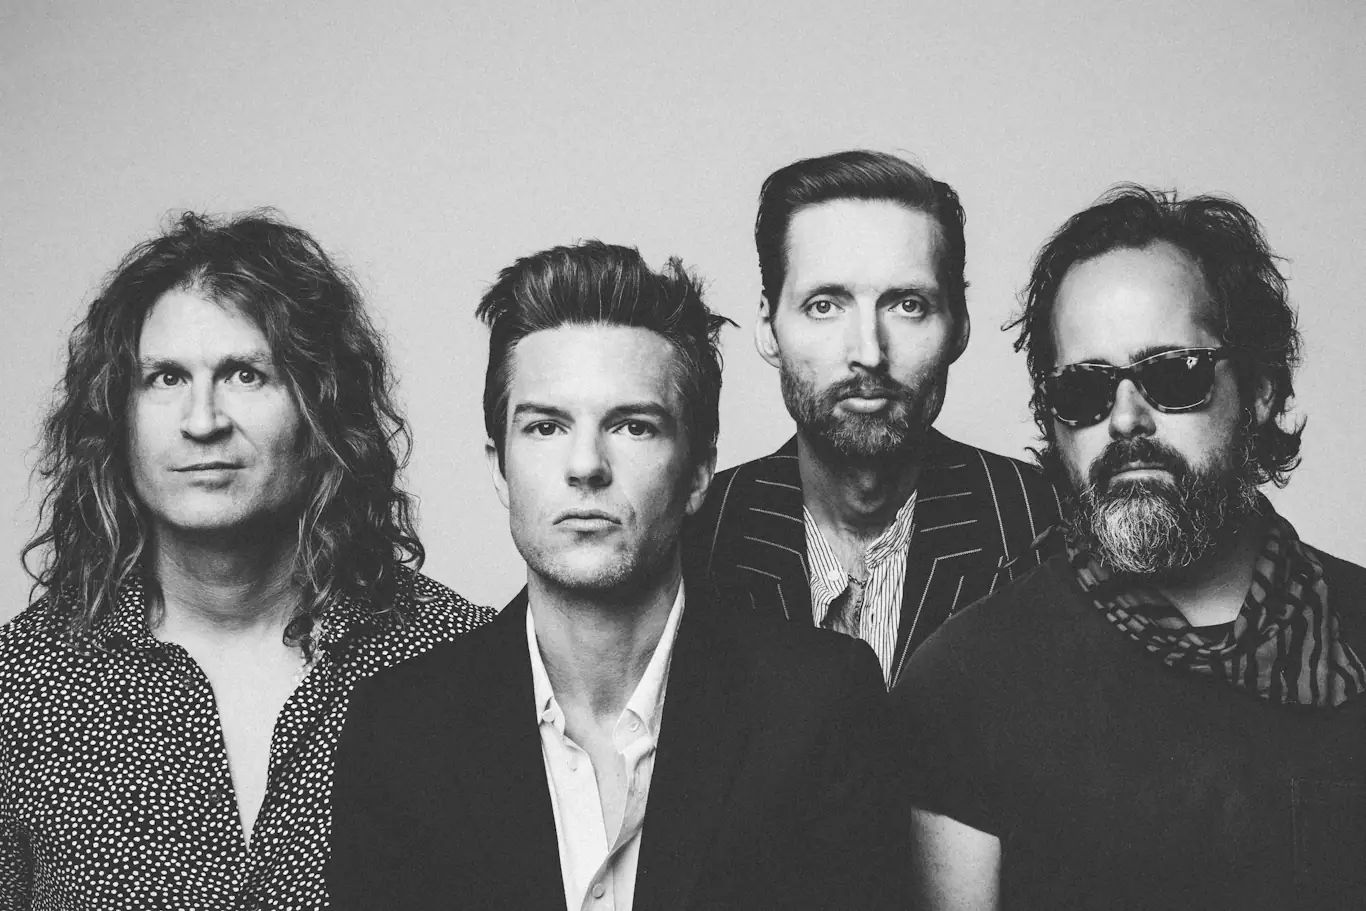 THE KILLERS announce new career-spanning collection REBEL DIAMONDS